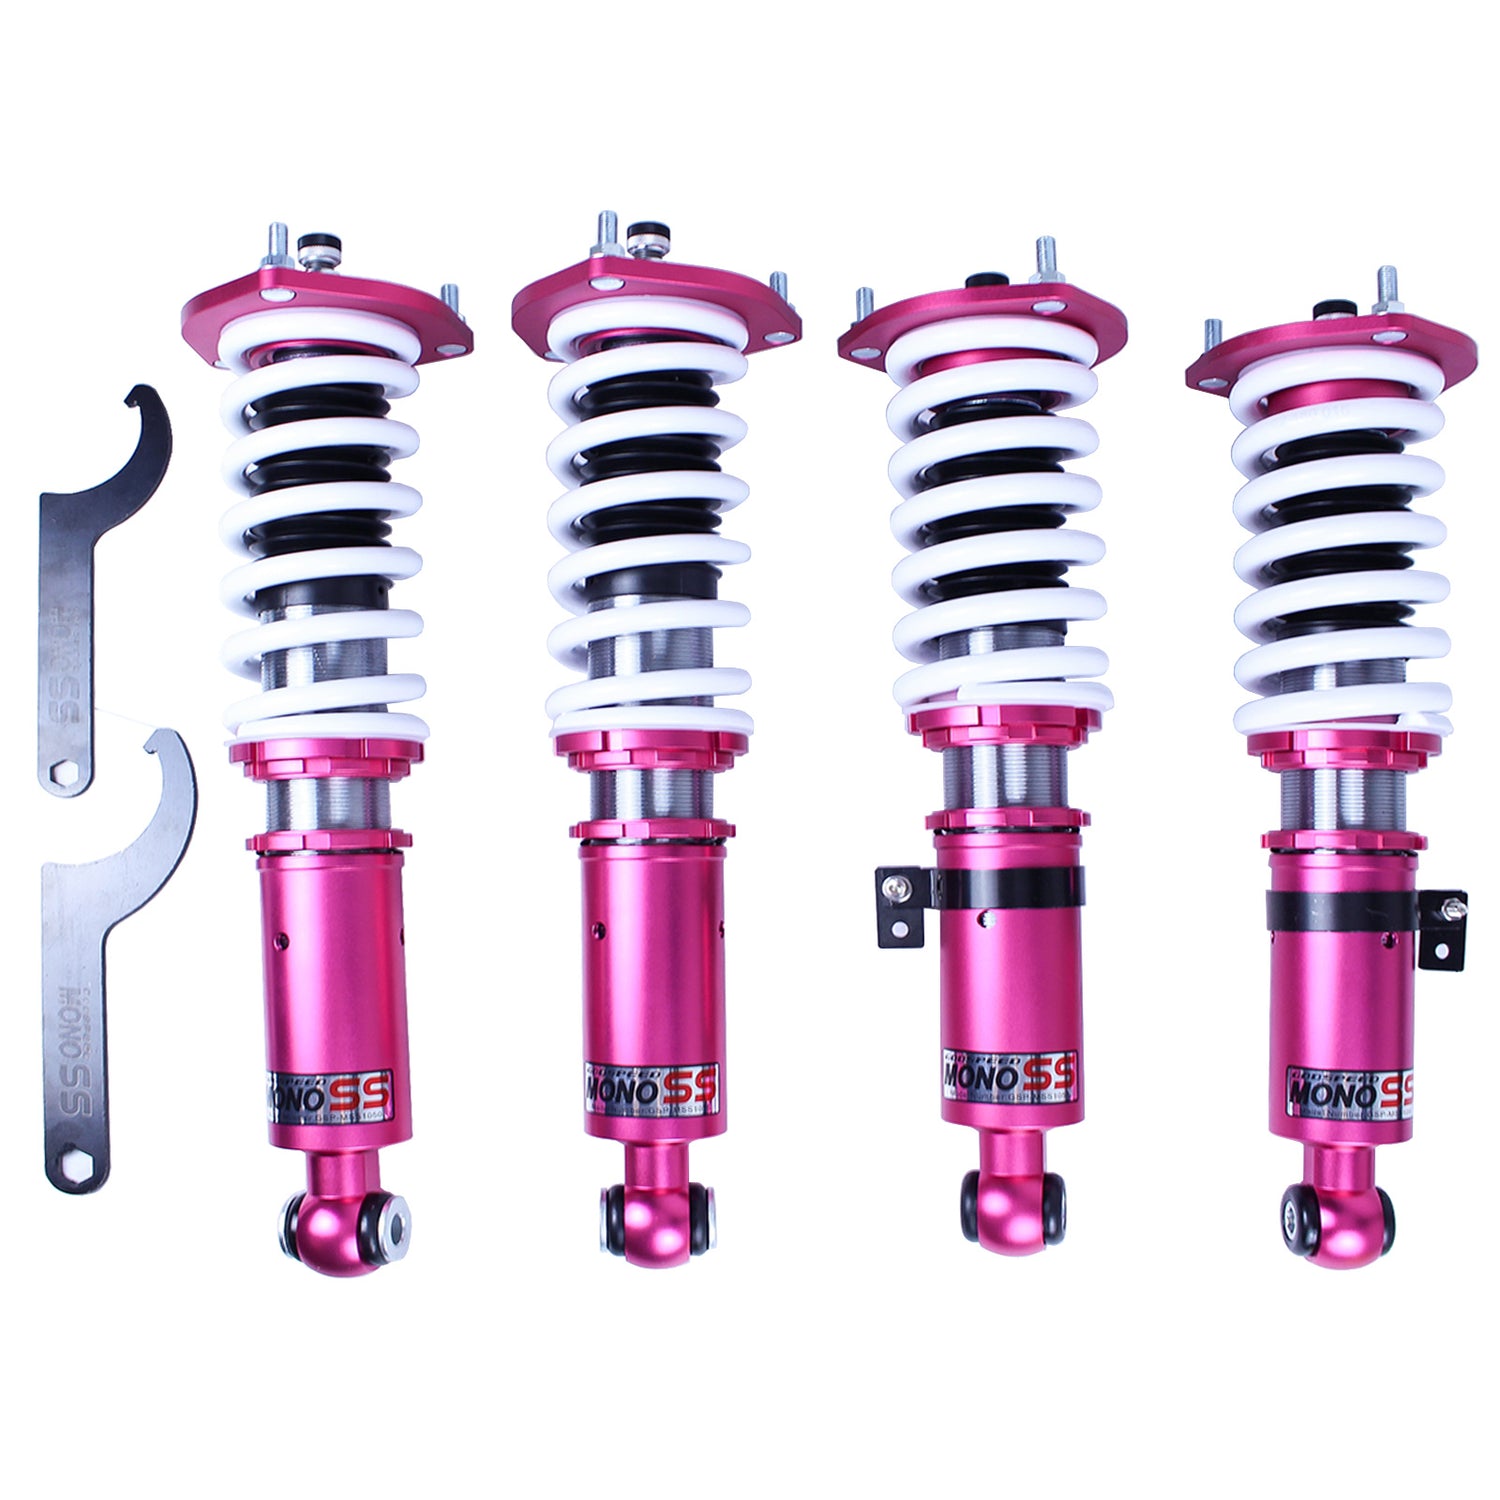 Godspeed MSS1050-A MonoSS Coilover Lowering Kit, Fully Adjustable, Ride Height, Spring Tension And 16 Click Damping, Toyota Chaser(JZX90/JZX100) 1992-01